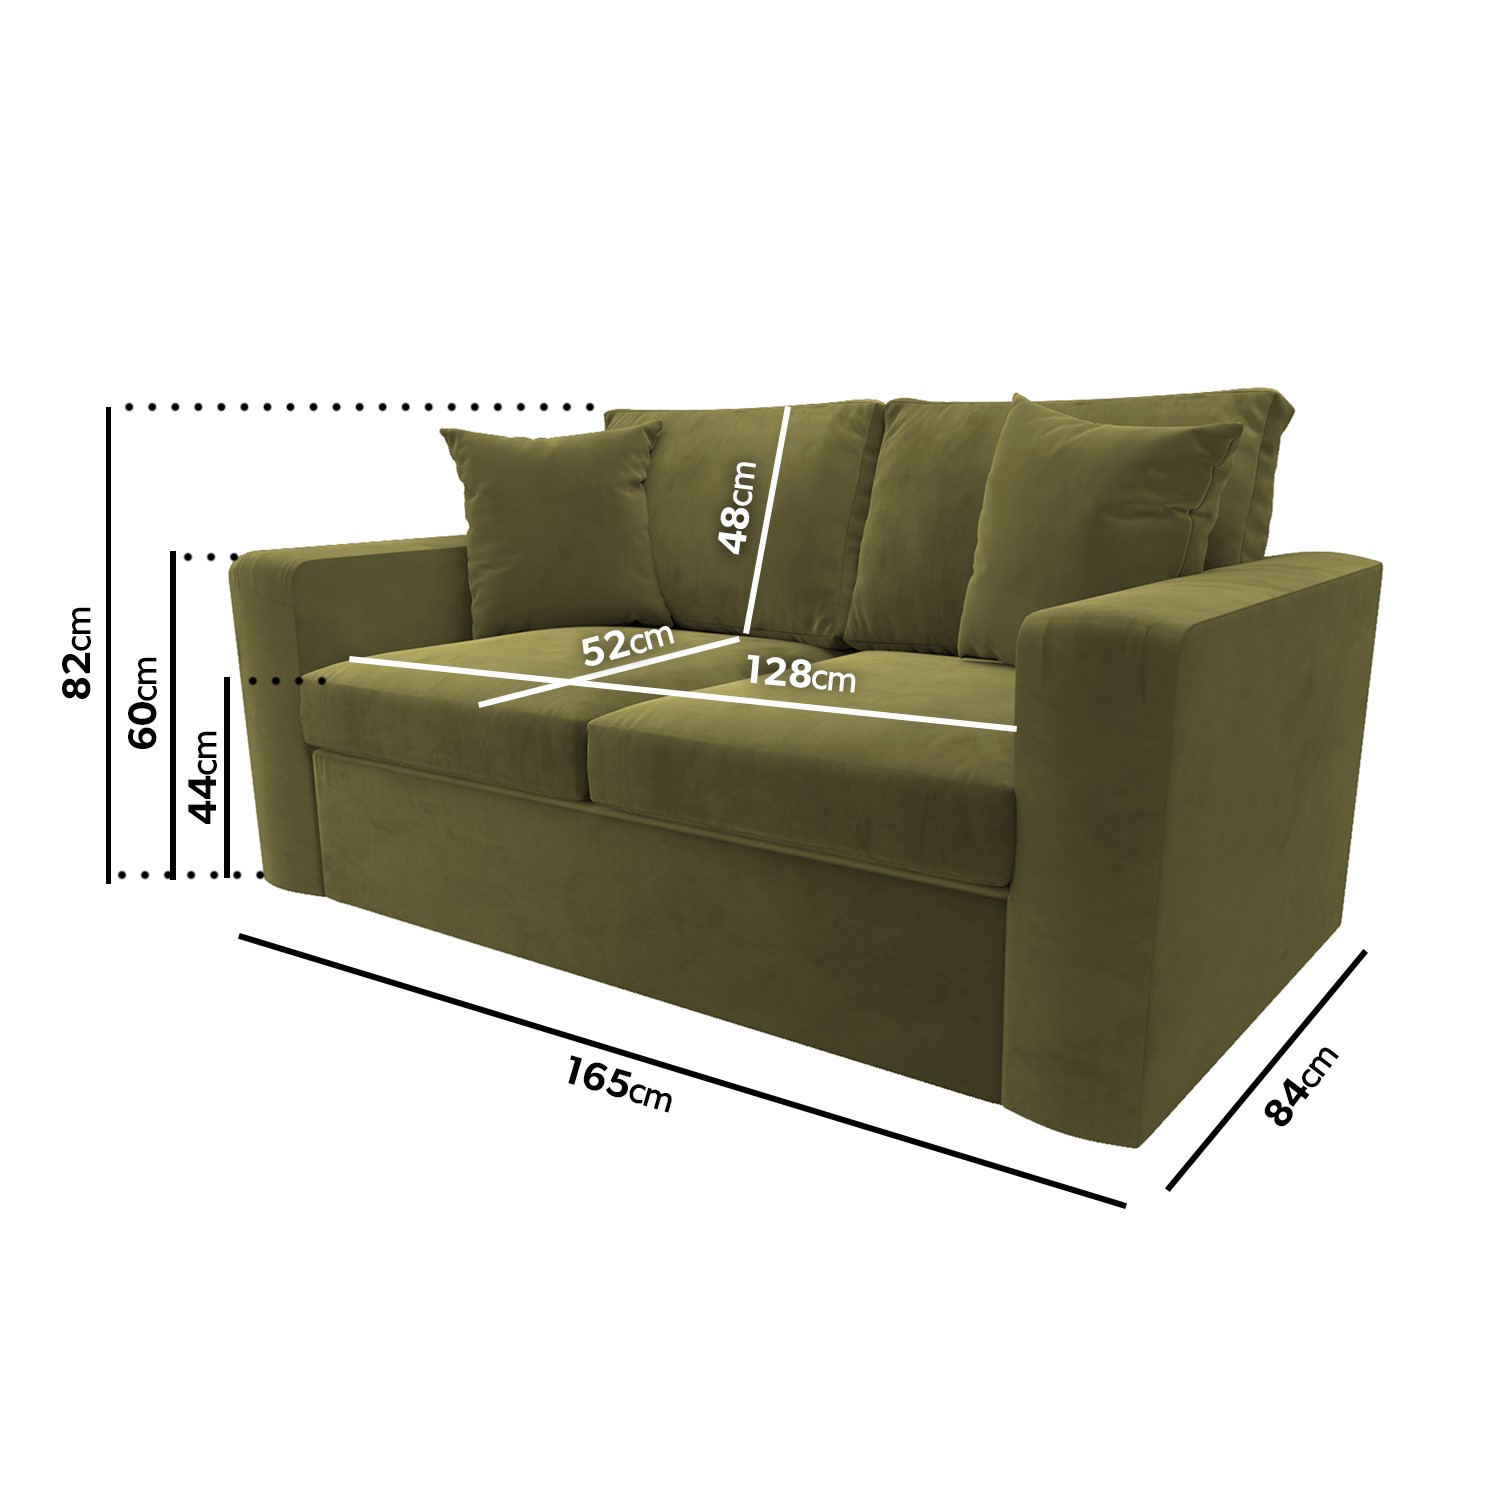 Read more about Olive green velvet pull out sofa bed seats 2 layton